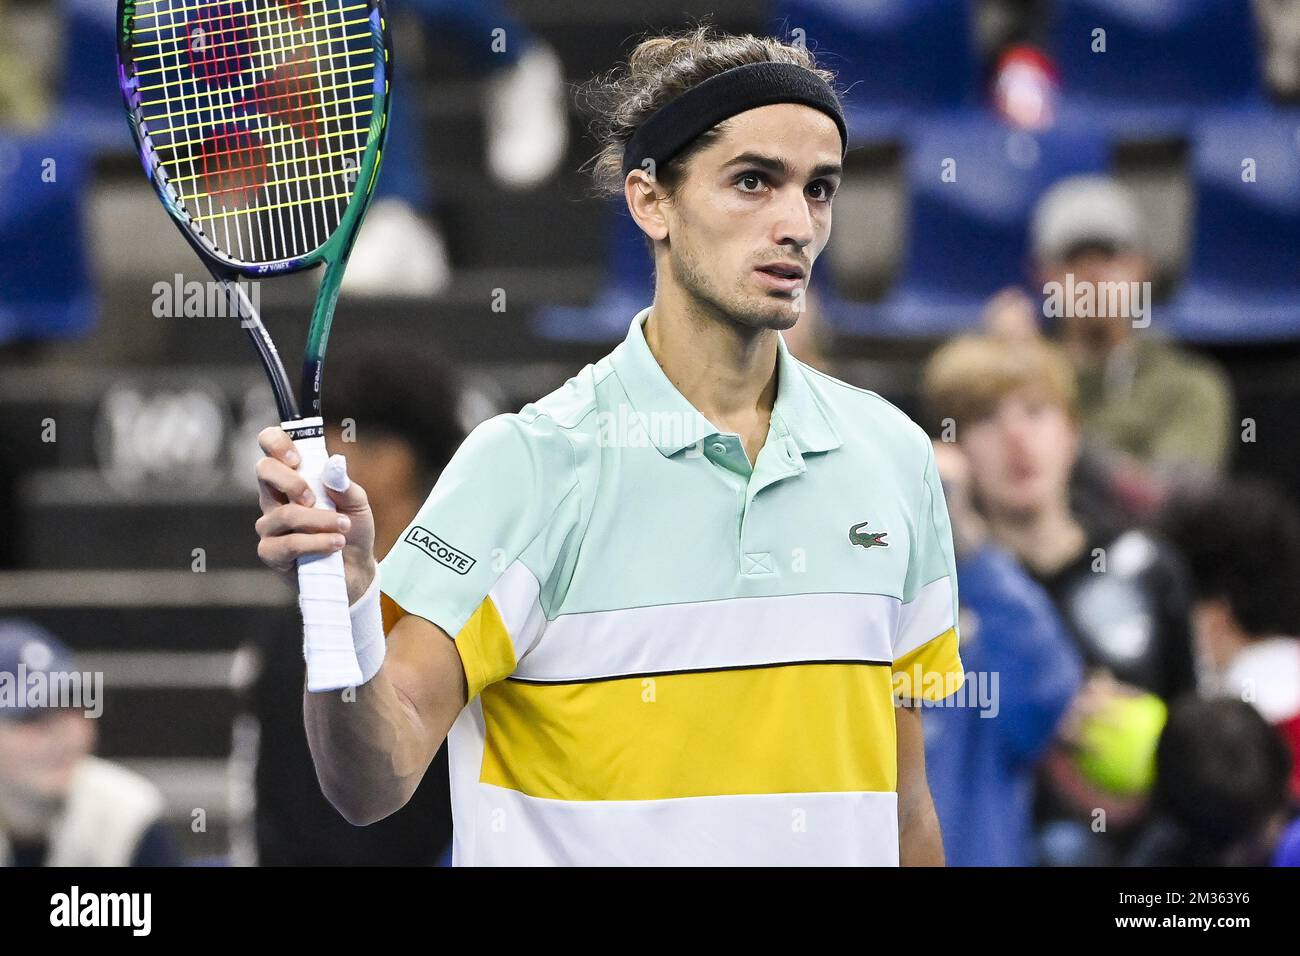 French Pierre-Hugues Herbert celebrates after winning a match between  Danish Rune and French Herbert, in the qualifications for the European Open Tennis  ATP tournament, in Antwerp, Sunday 17 October 2021. BELGA PHOTO